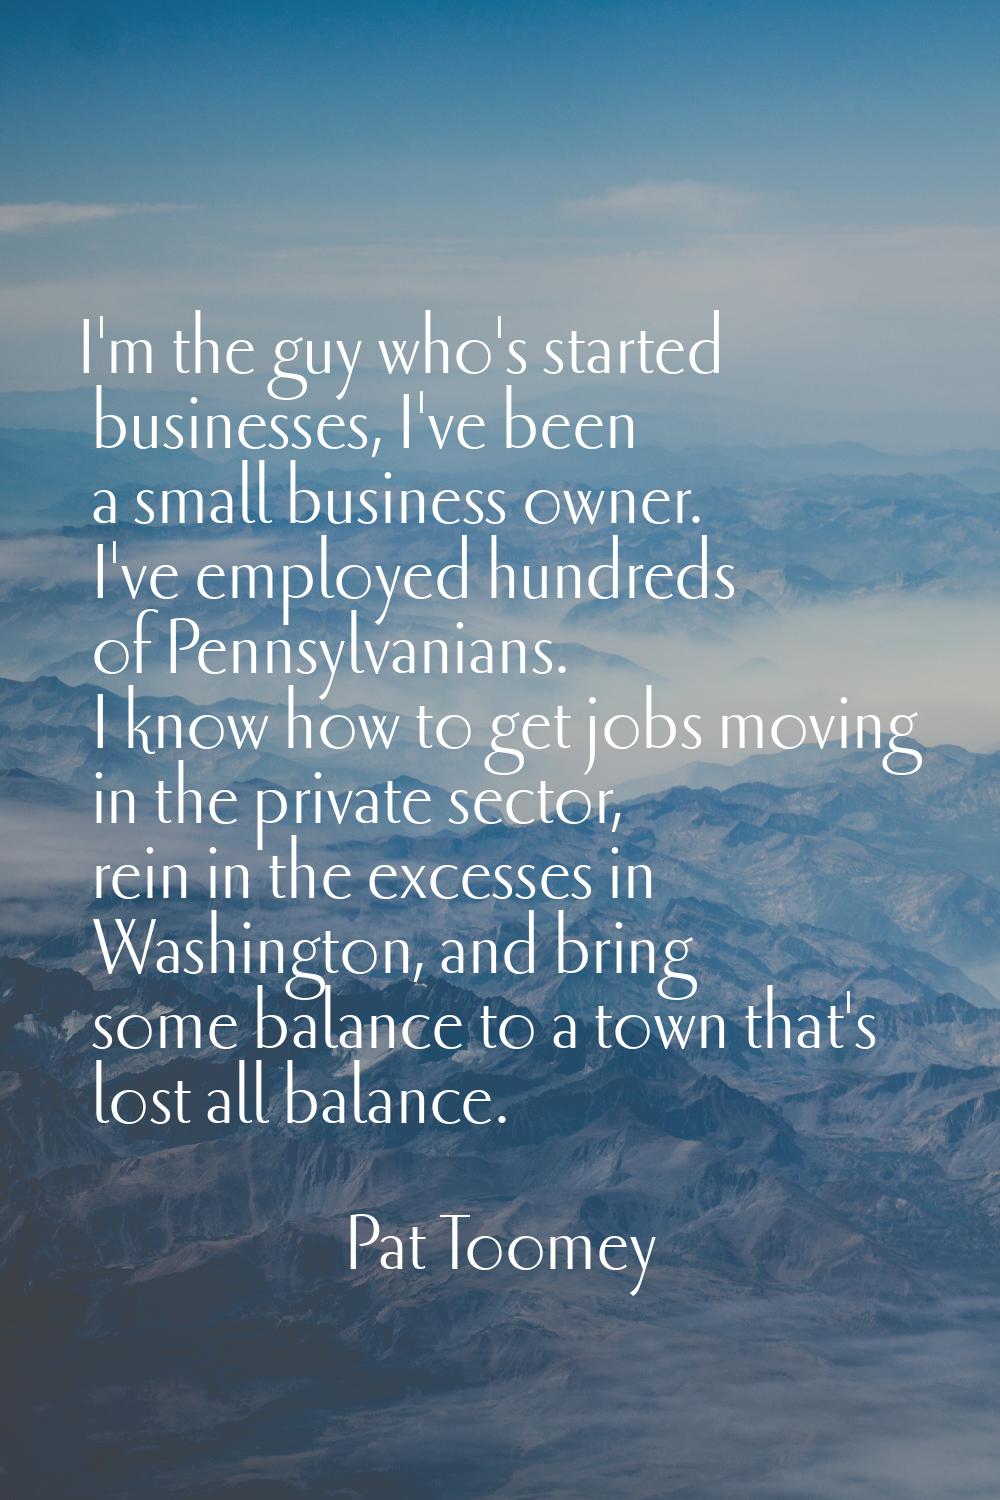 I'm the guy who's started businesses, I've been a small business owner. I've employed hundreds of P